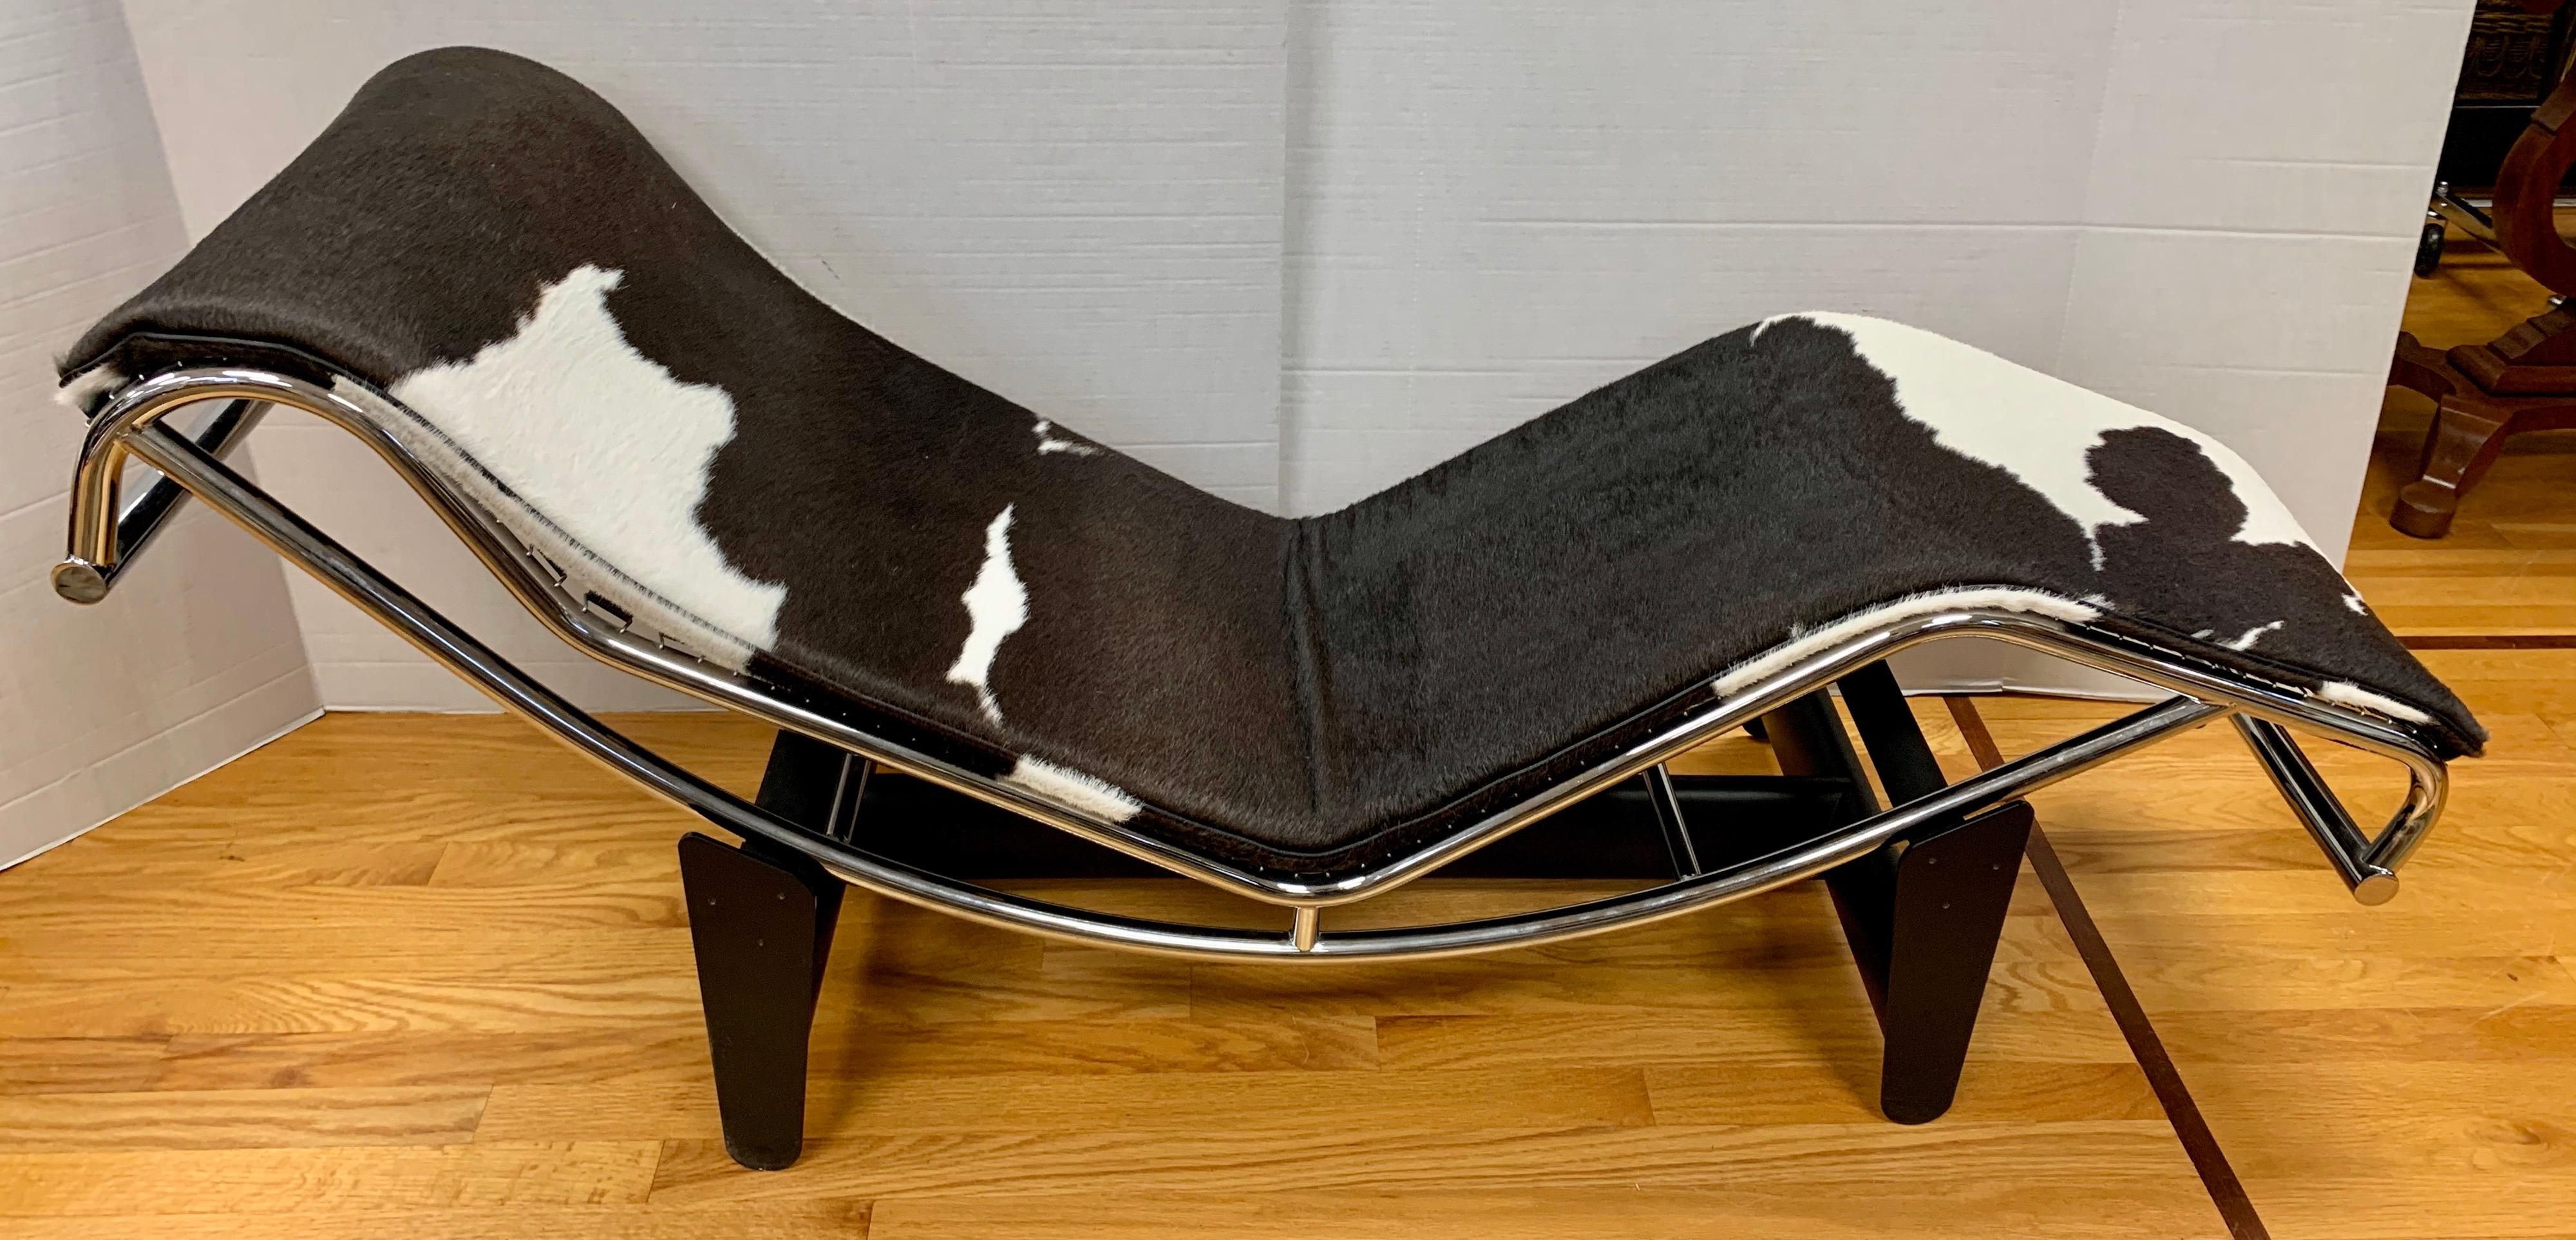 Iconic Le Corbusier style LC4 chaise with adjustable inclination upholstered in brown and white cowhide. Tilt it to suit your needs from upright to a full recline. The LC4 conforms to the bodies natural curves. Base element in metal and steel,